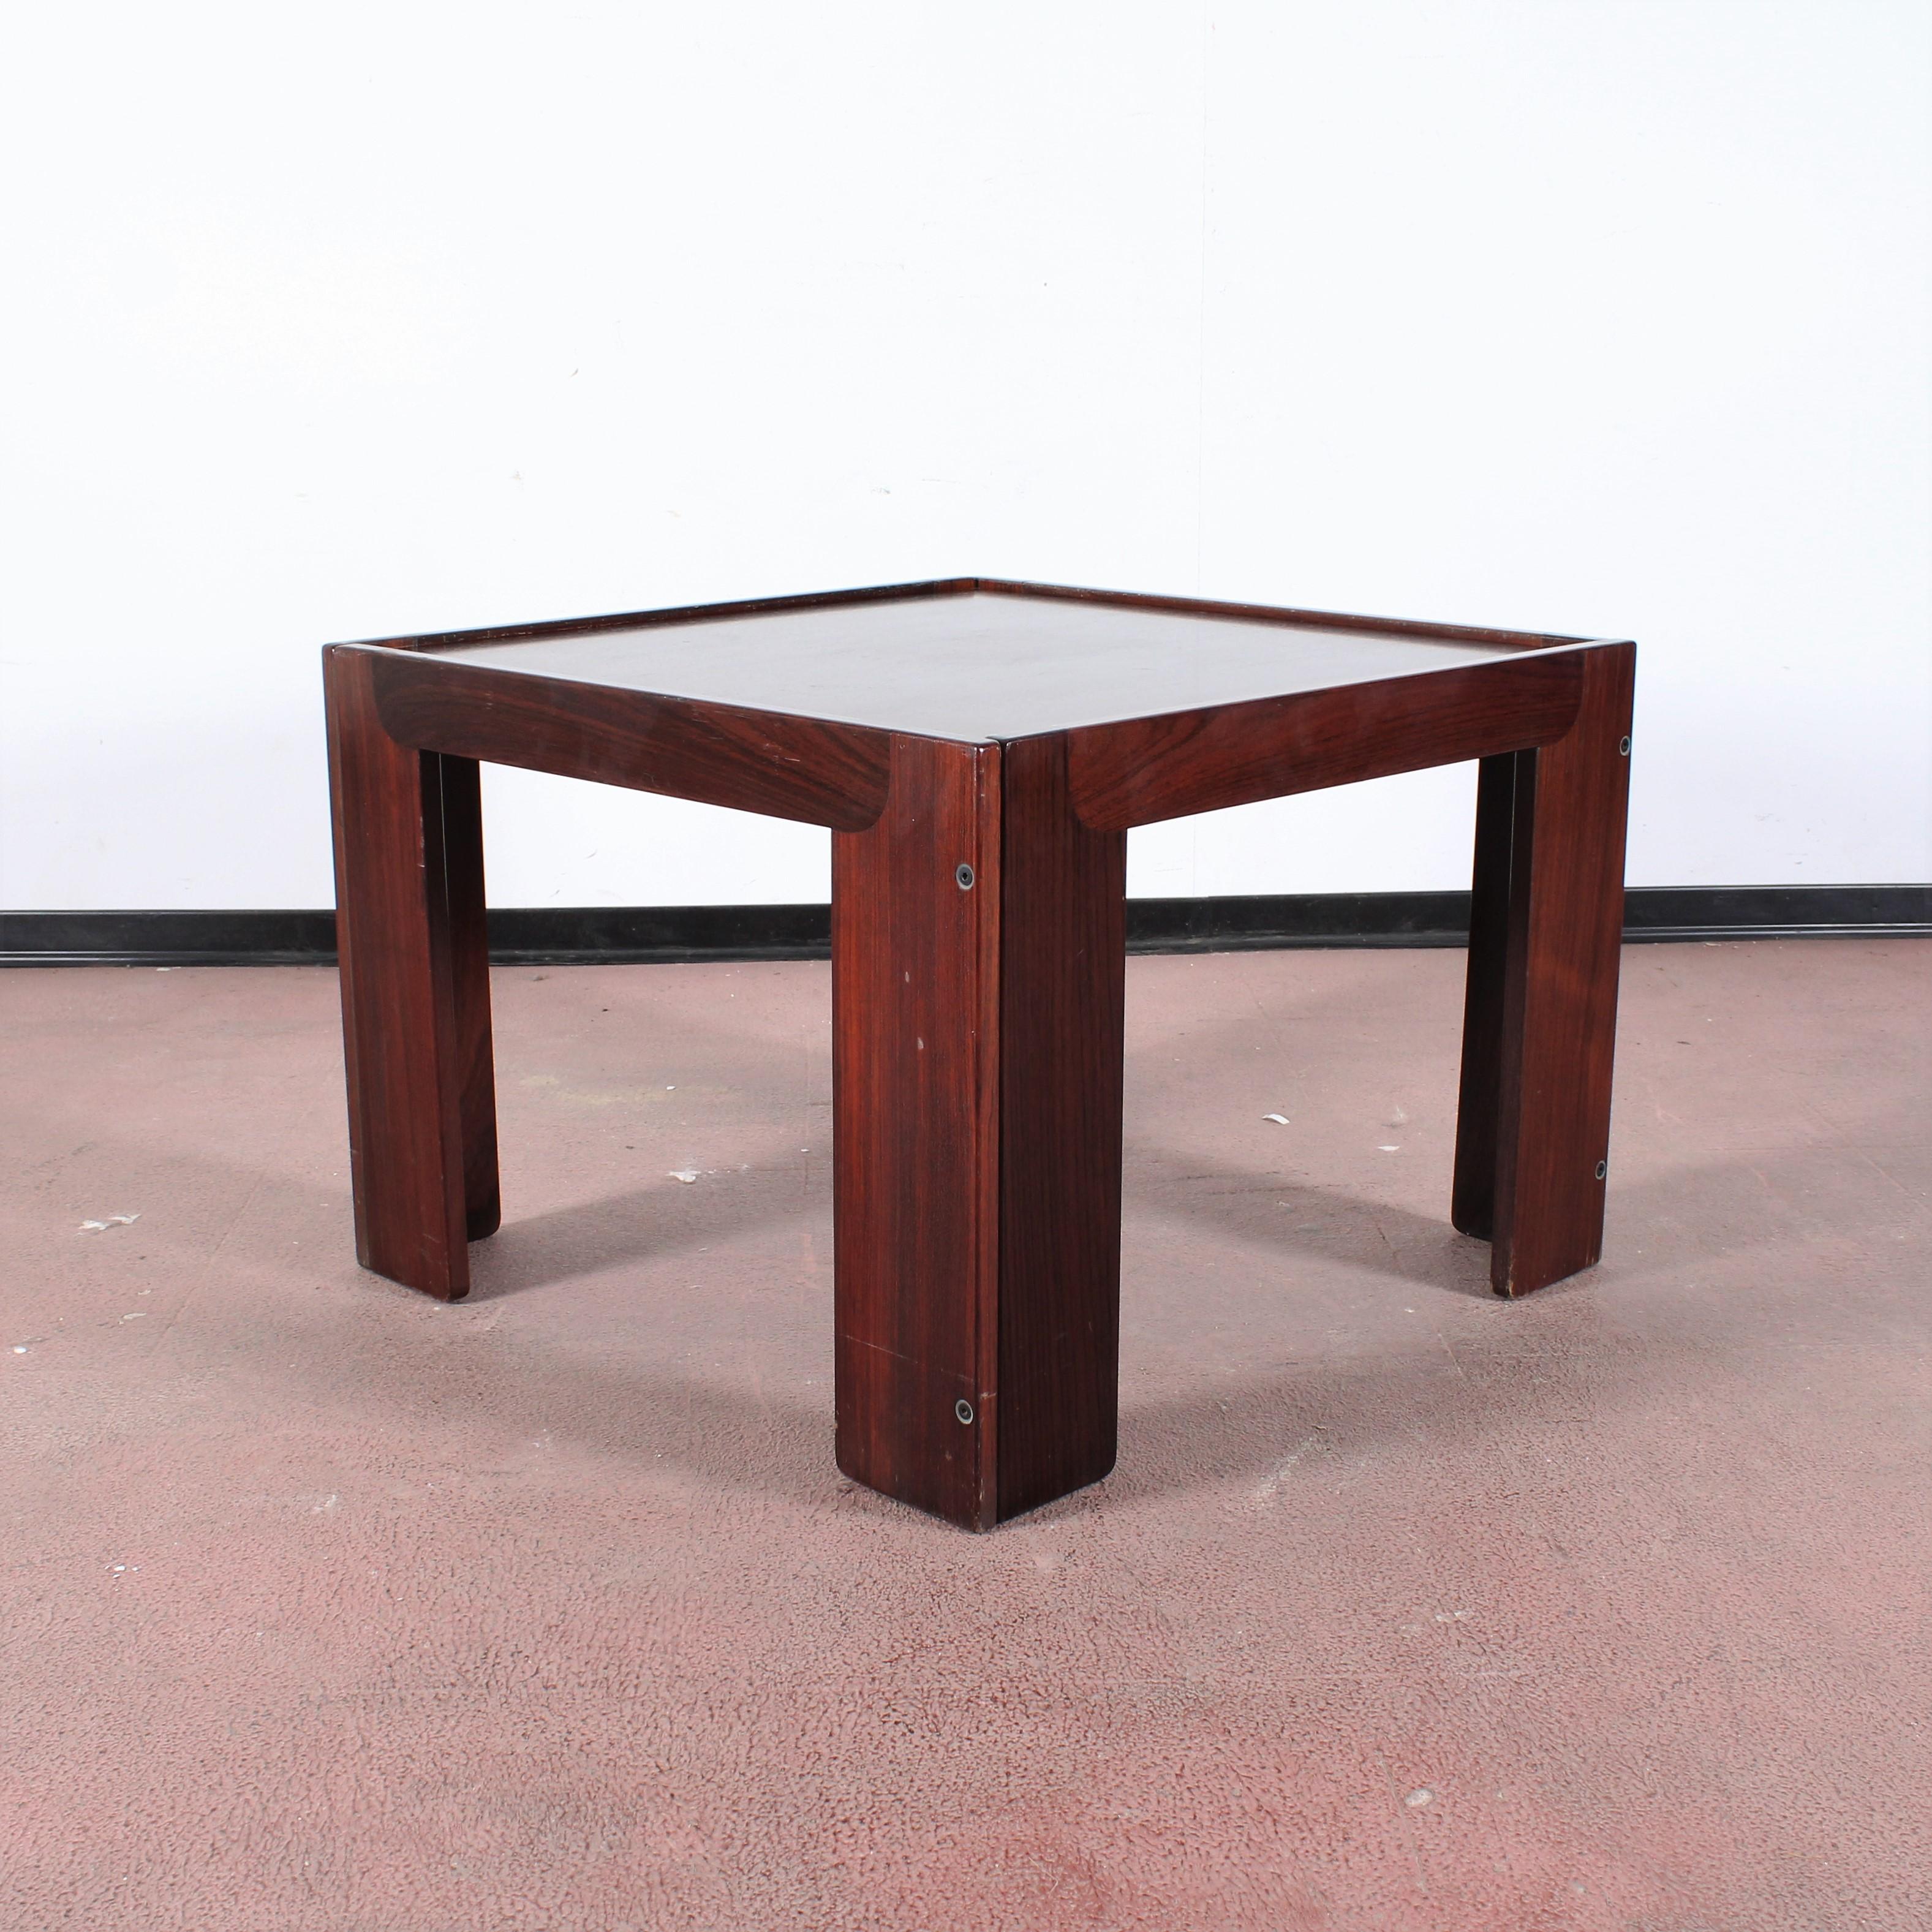 Mid-Century A. & T. Scarpa for Cassina, Meda Wood Coffee Table mod 771 '65 Italy 2